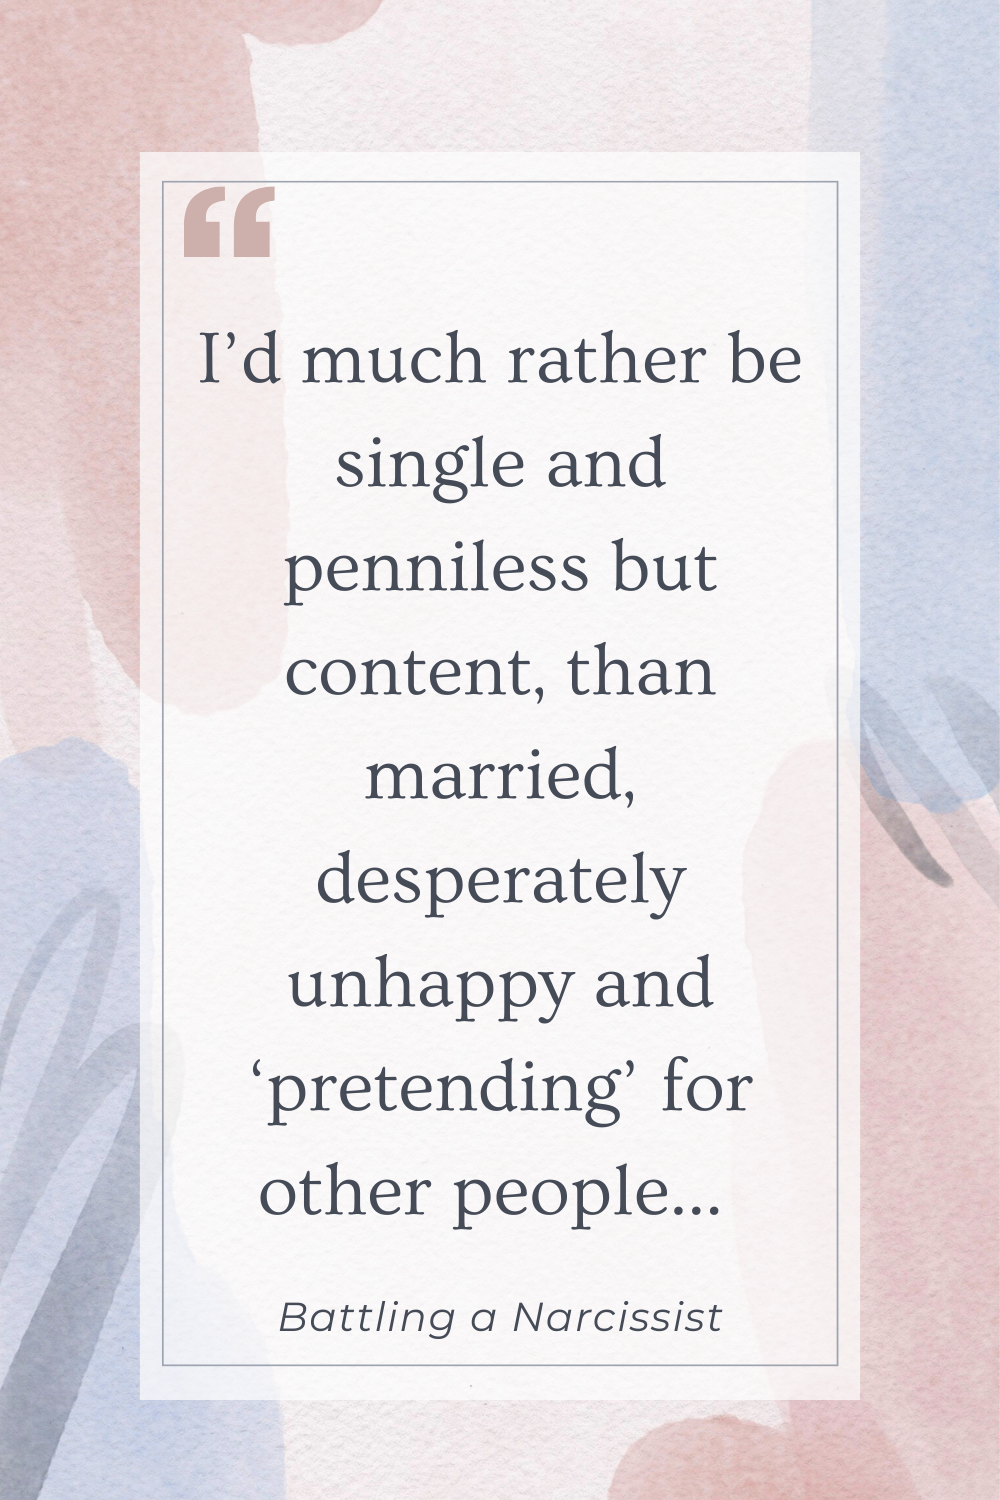 I'd rather be single and penniless, than married, desperately unhappy and 'pretending' for other people.

#relationships #marriage #narcissism #love